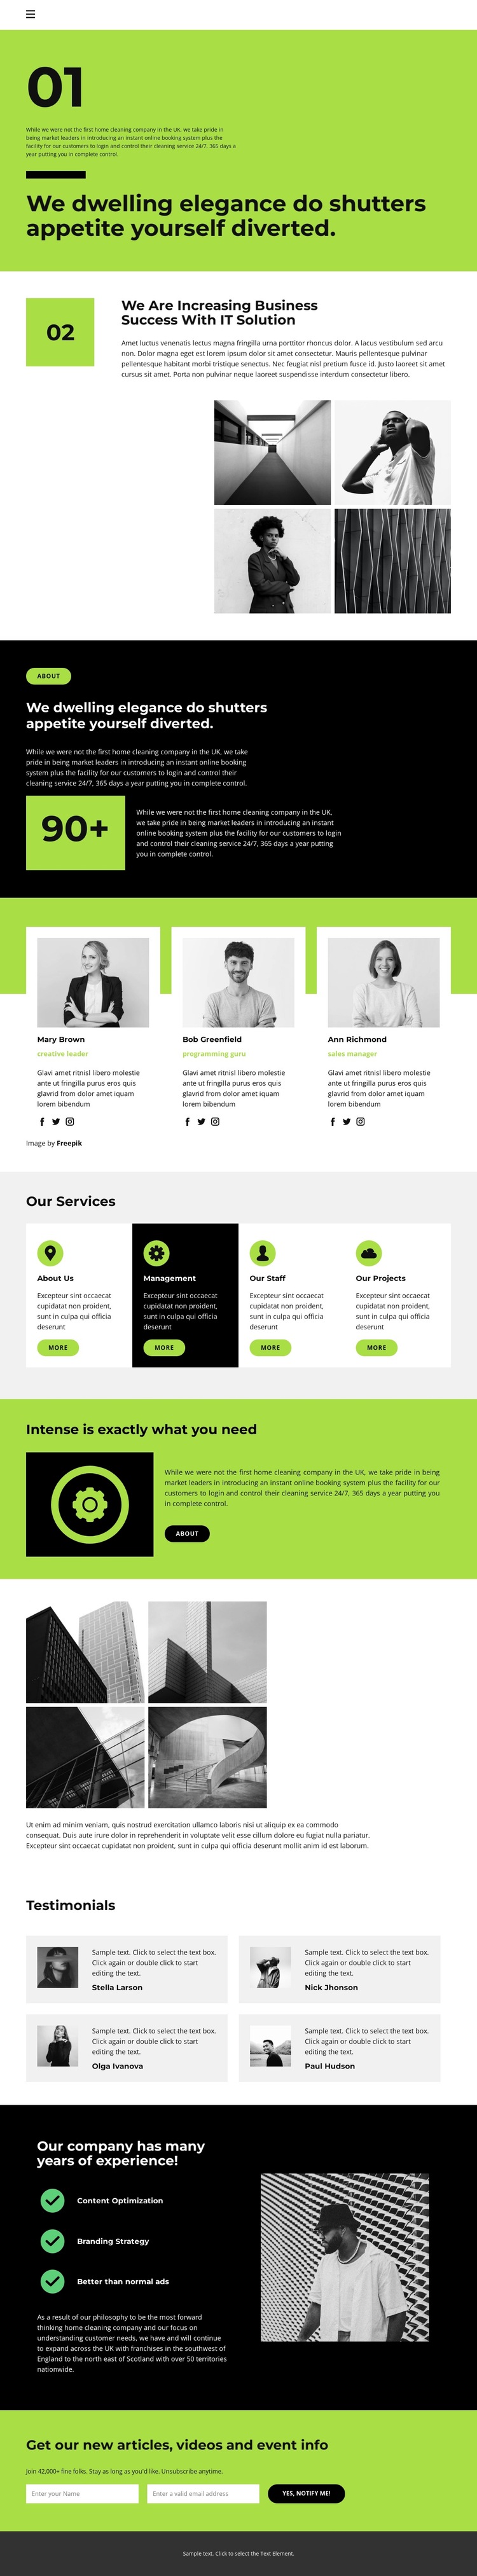 Save your finances HTML5 Template